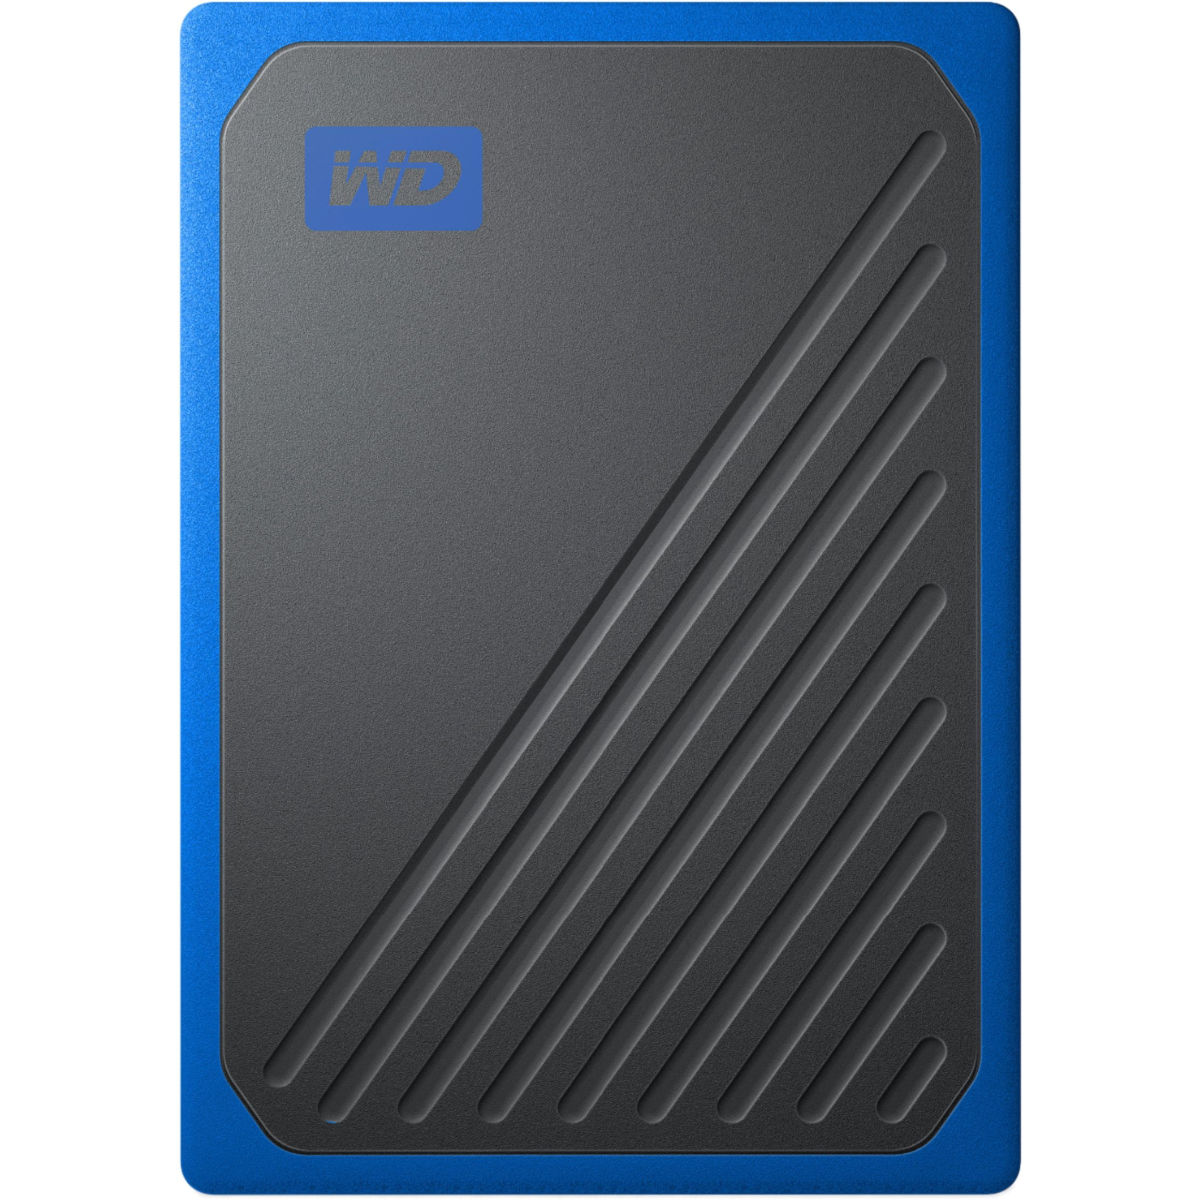 WD My Passport Go 500GB External USB 3.0 Portable Solid State Drive